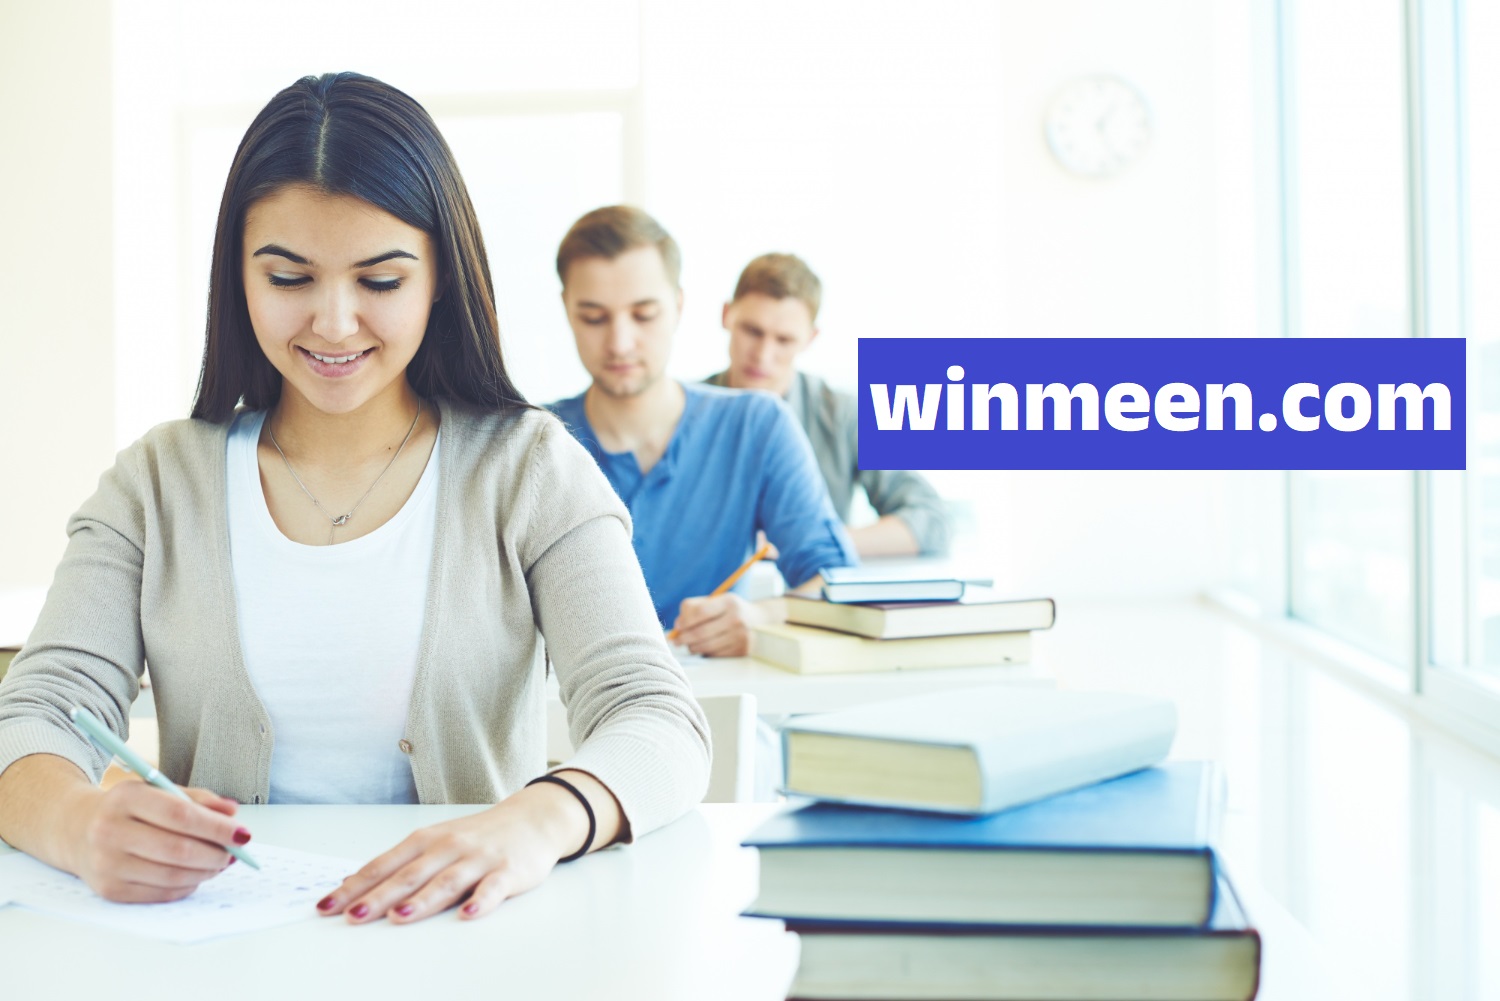 Ntse Exam Preparation For Class 10th Students - Winmeen